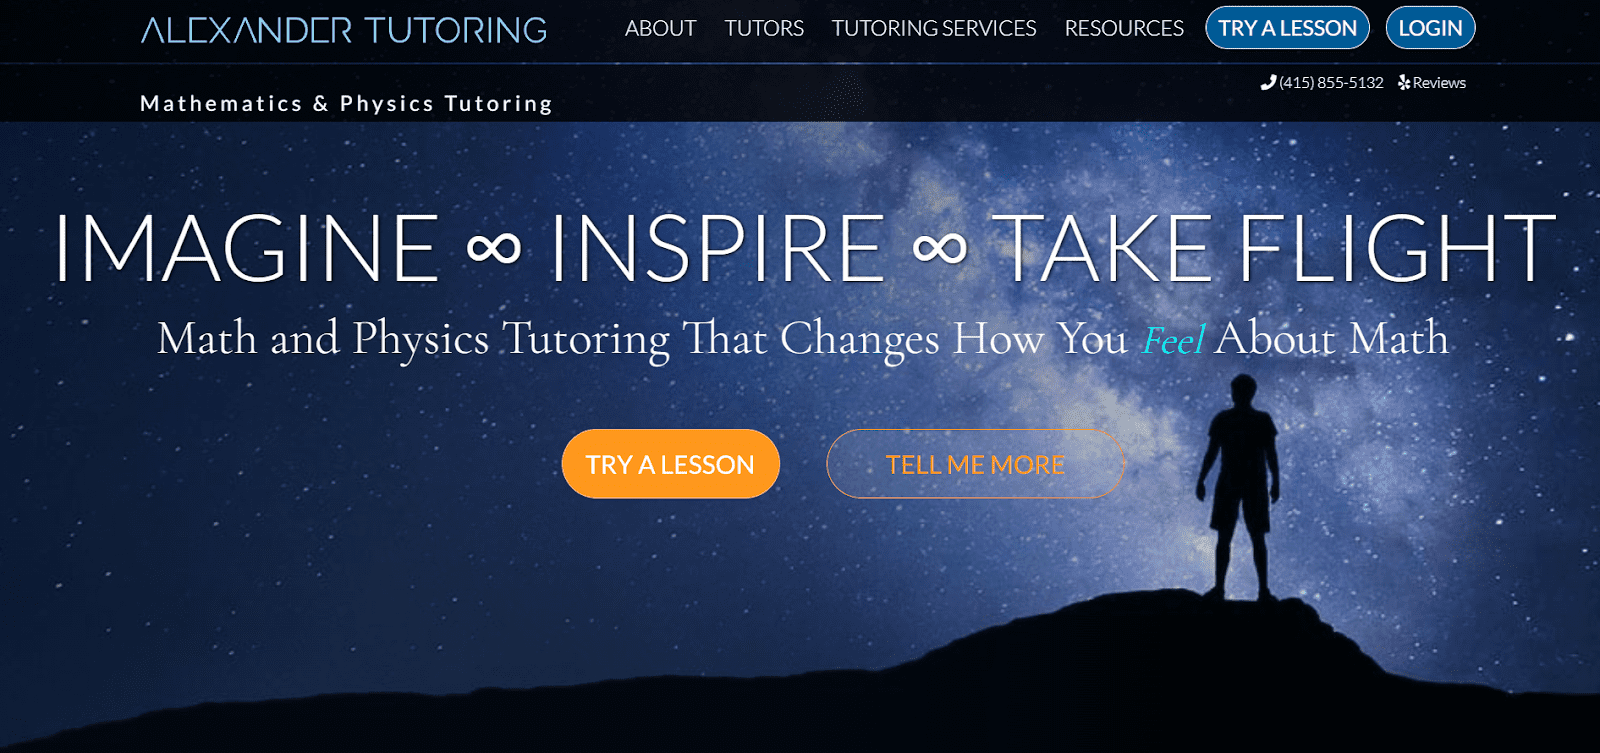 screenshot of the Alexander Tutoring homepage, which shows a young person standing on a rock, silhouetted against a glittering blueish night sky